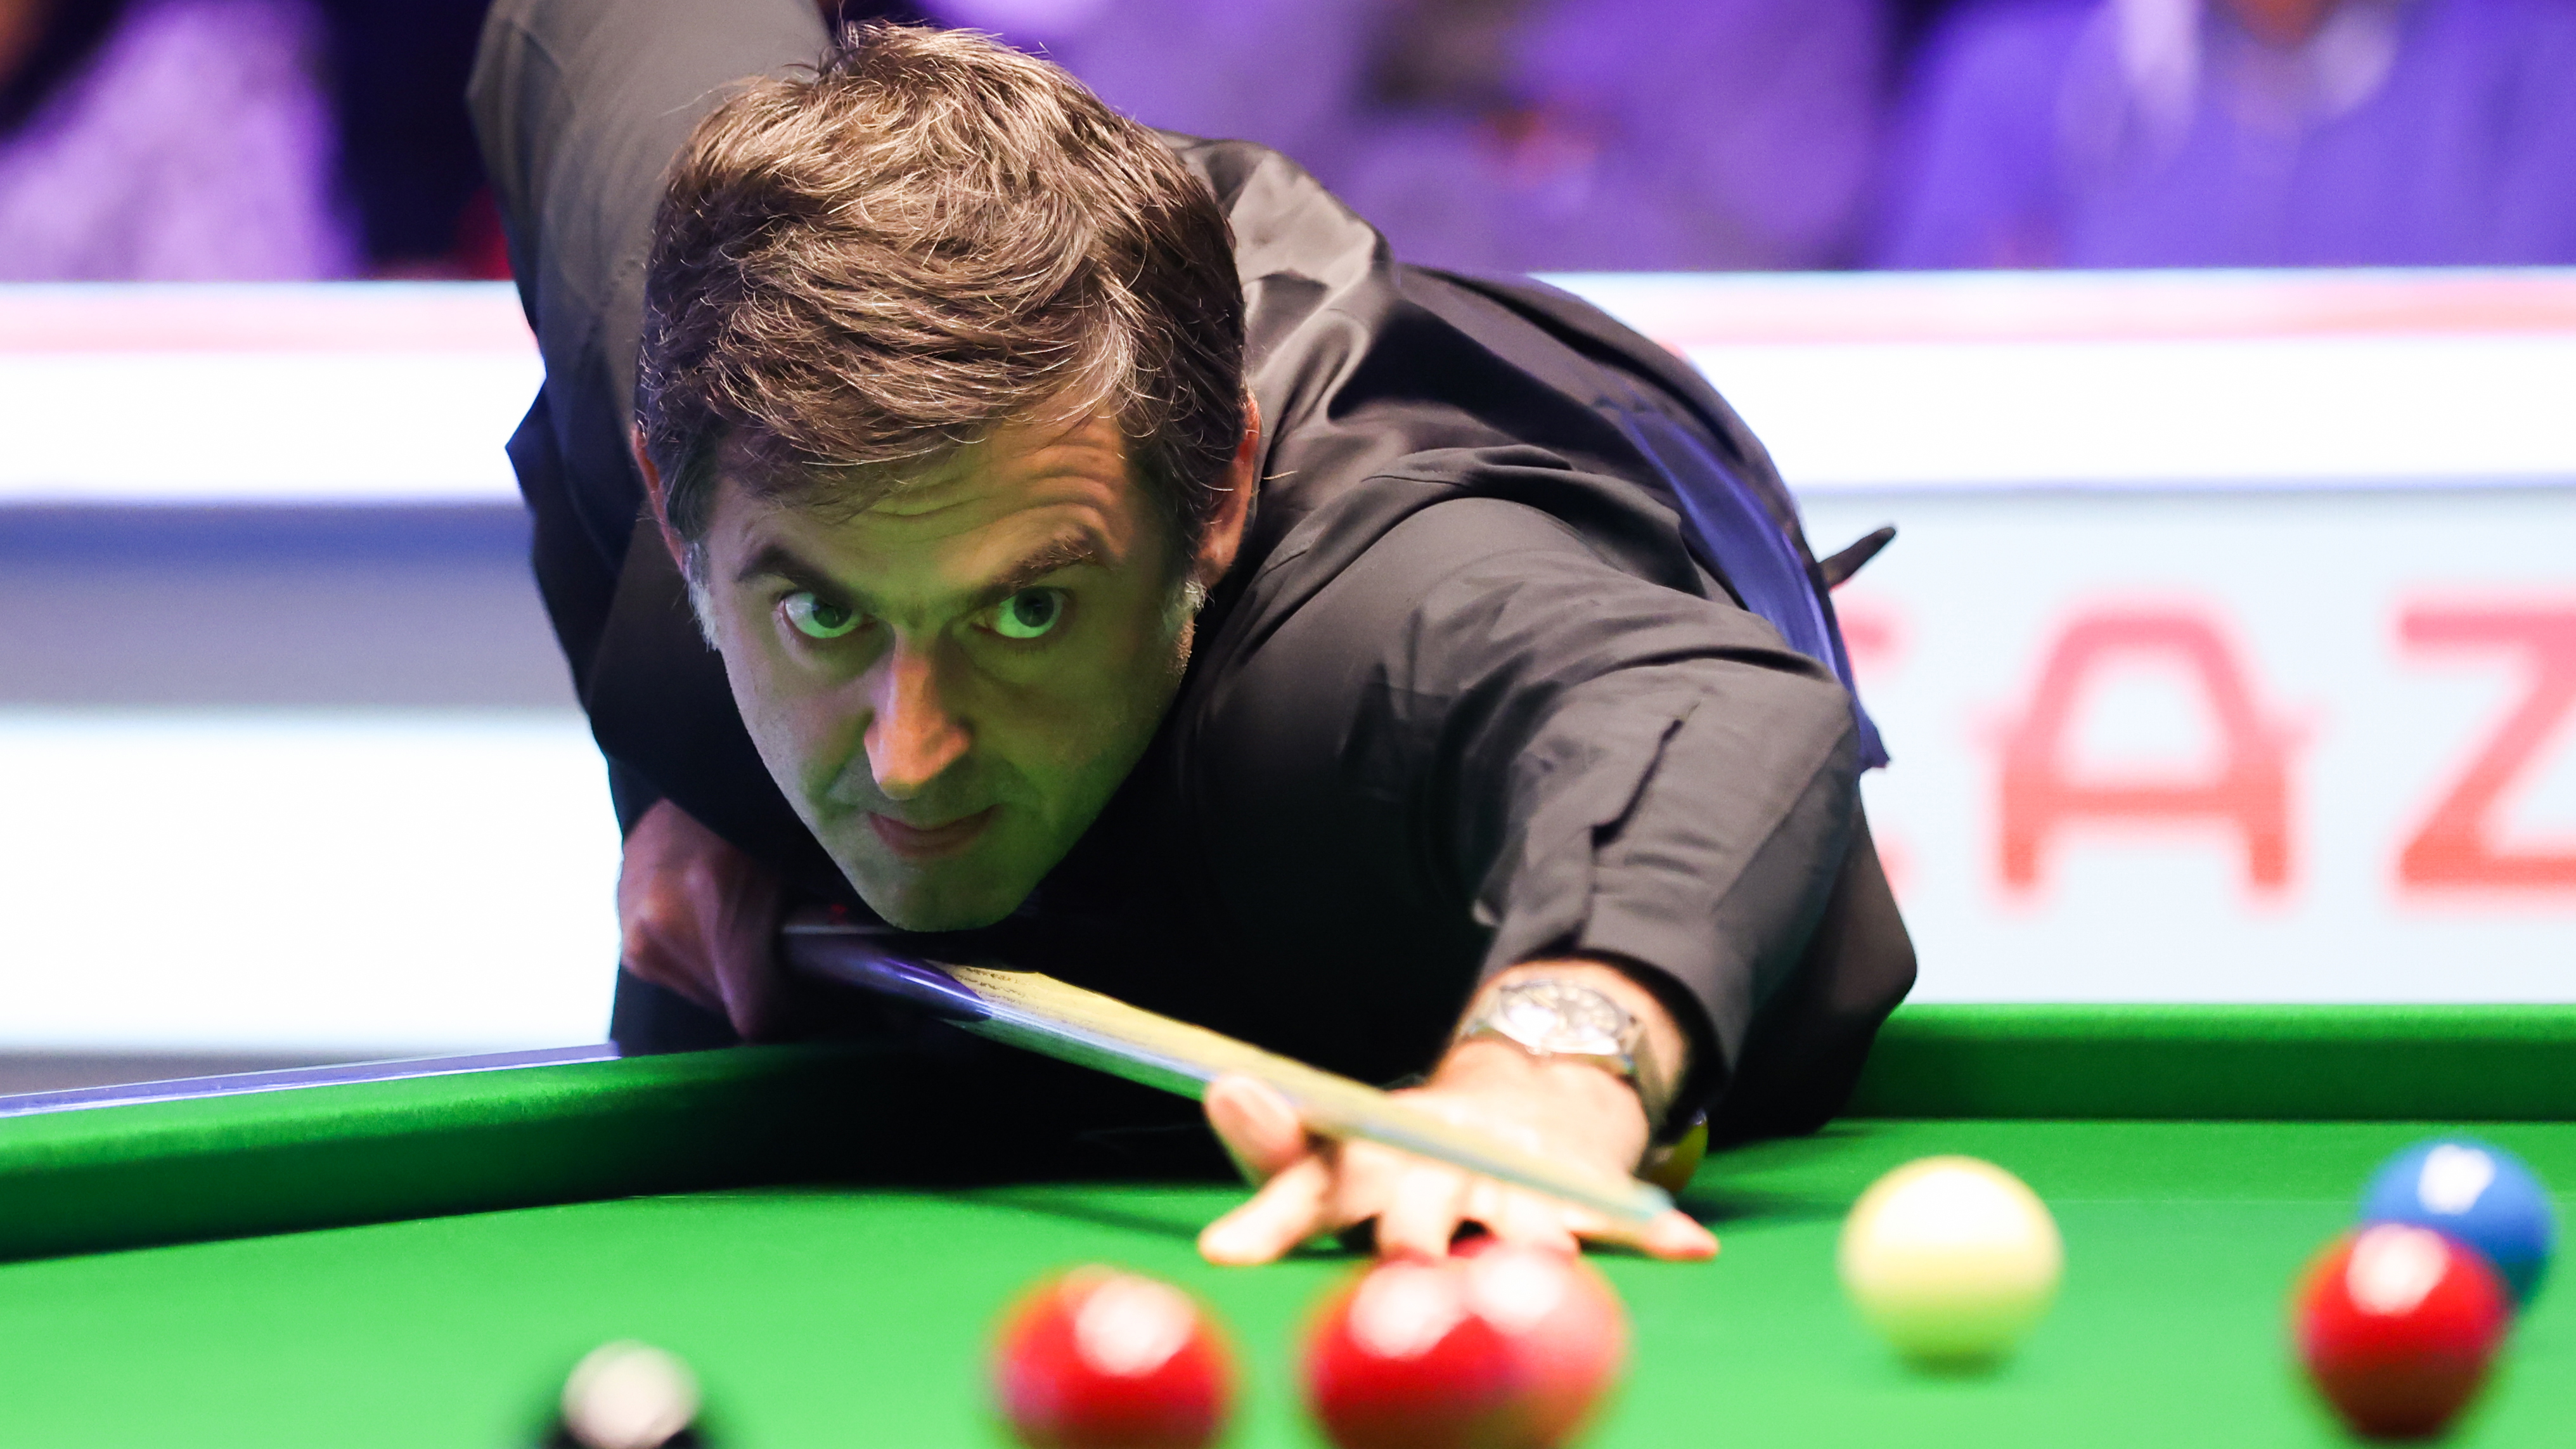 Snooker results Ronnie OSullivan marches into UK Championship quarter-finals after York defeat of Zhou Yuelong